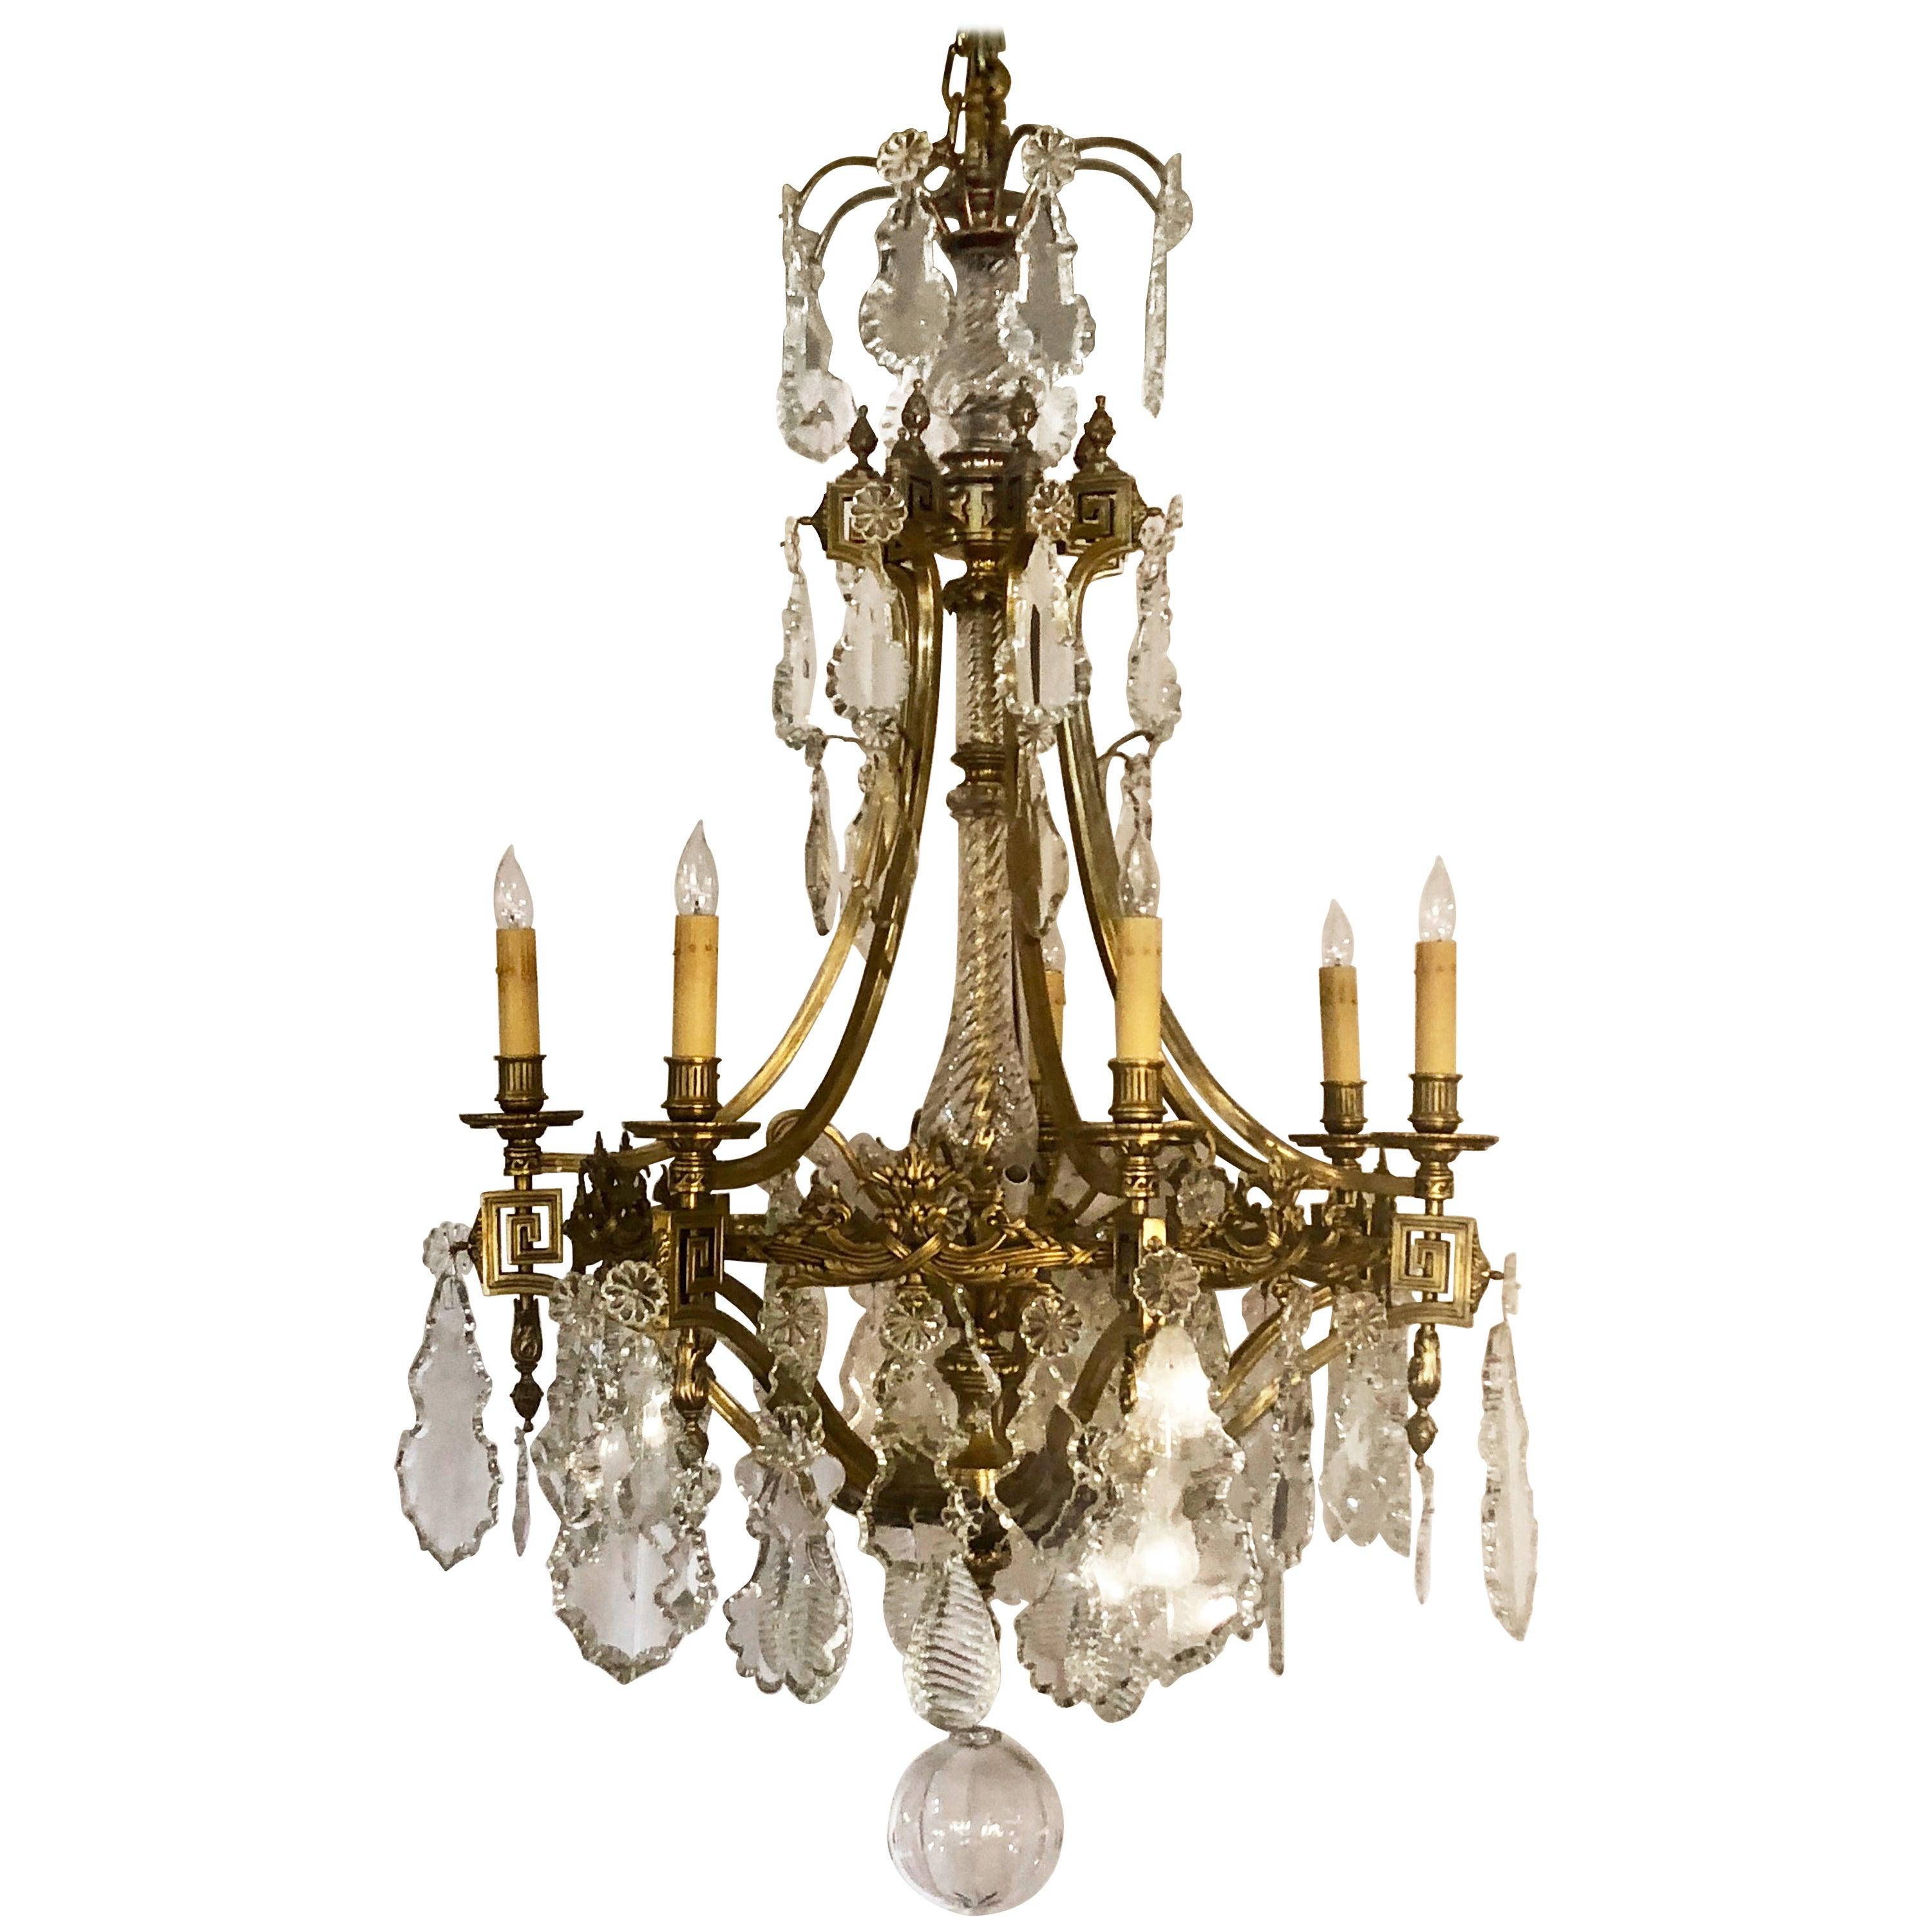 Antique French gold bronze and fine crystal chandelier, circa 1890-1900.